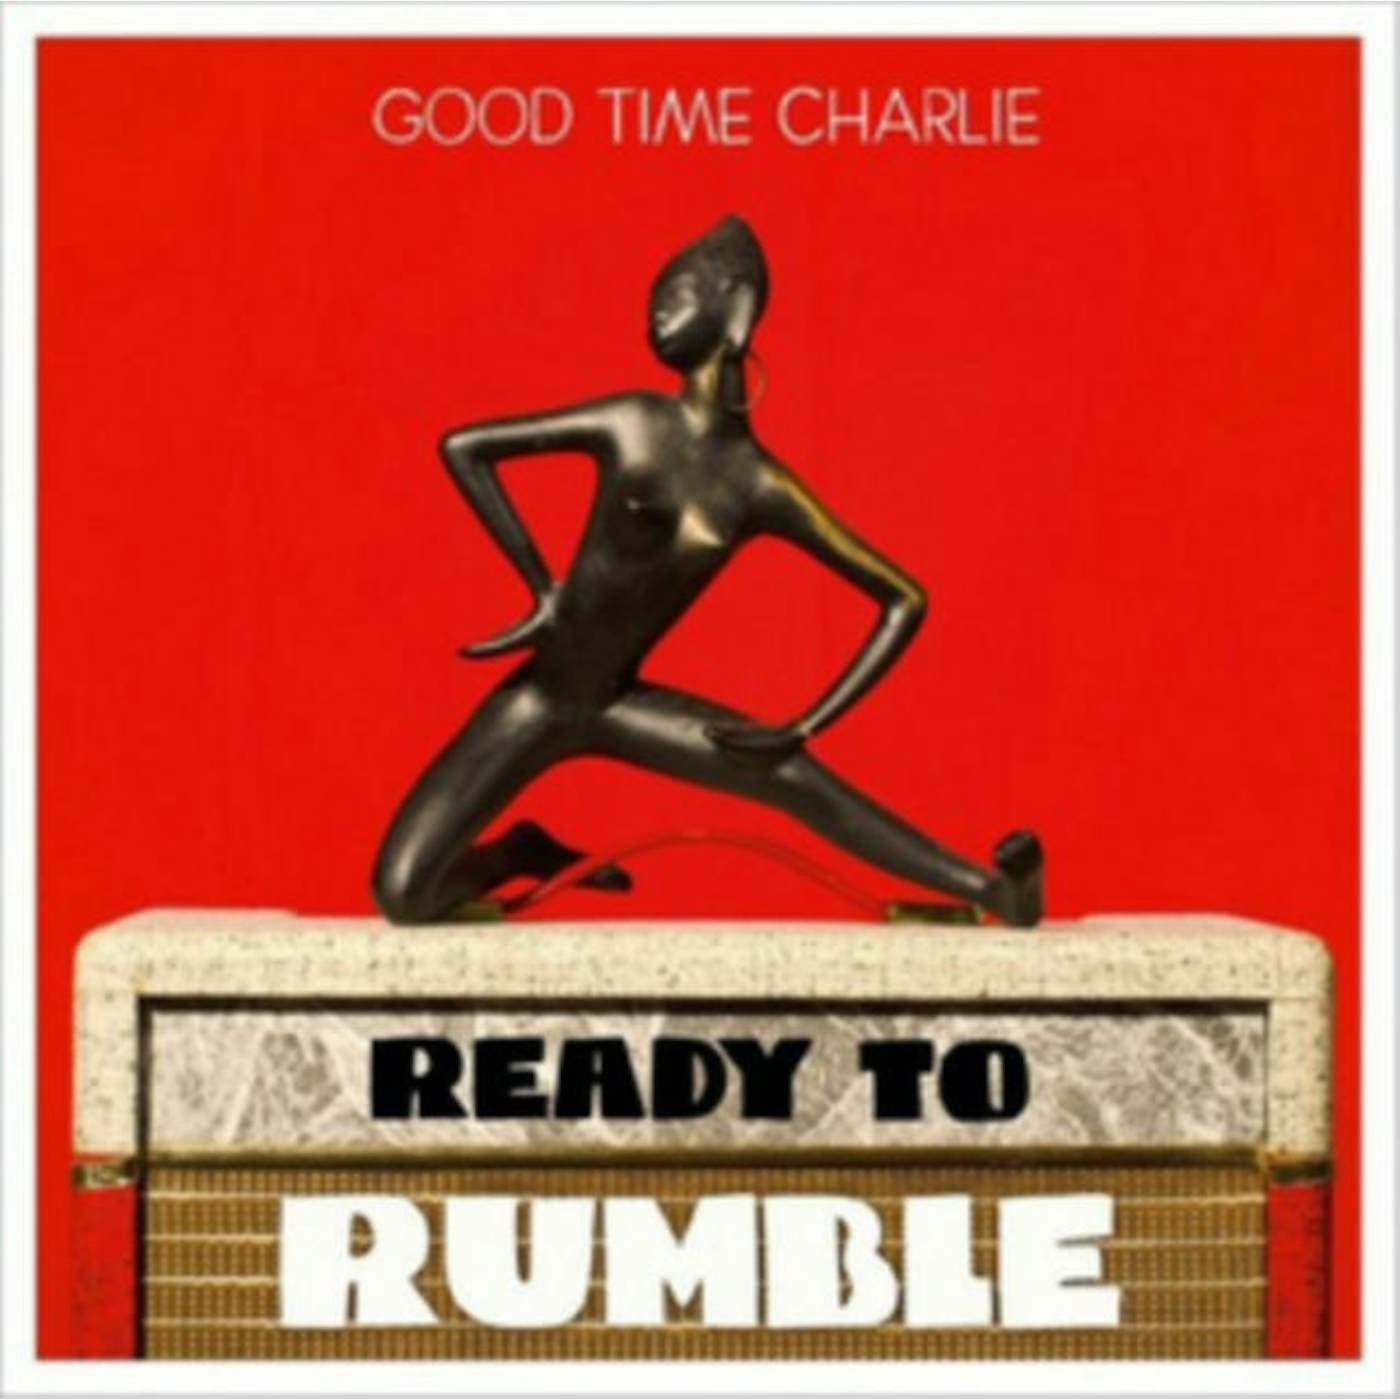 Good Time Charlie LP - Ready To Rumble (Vinyl)